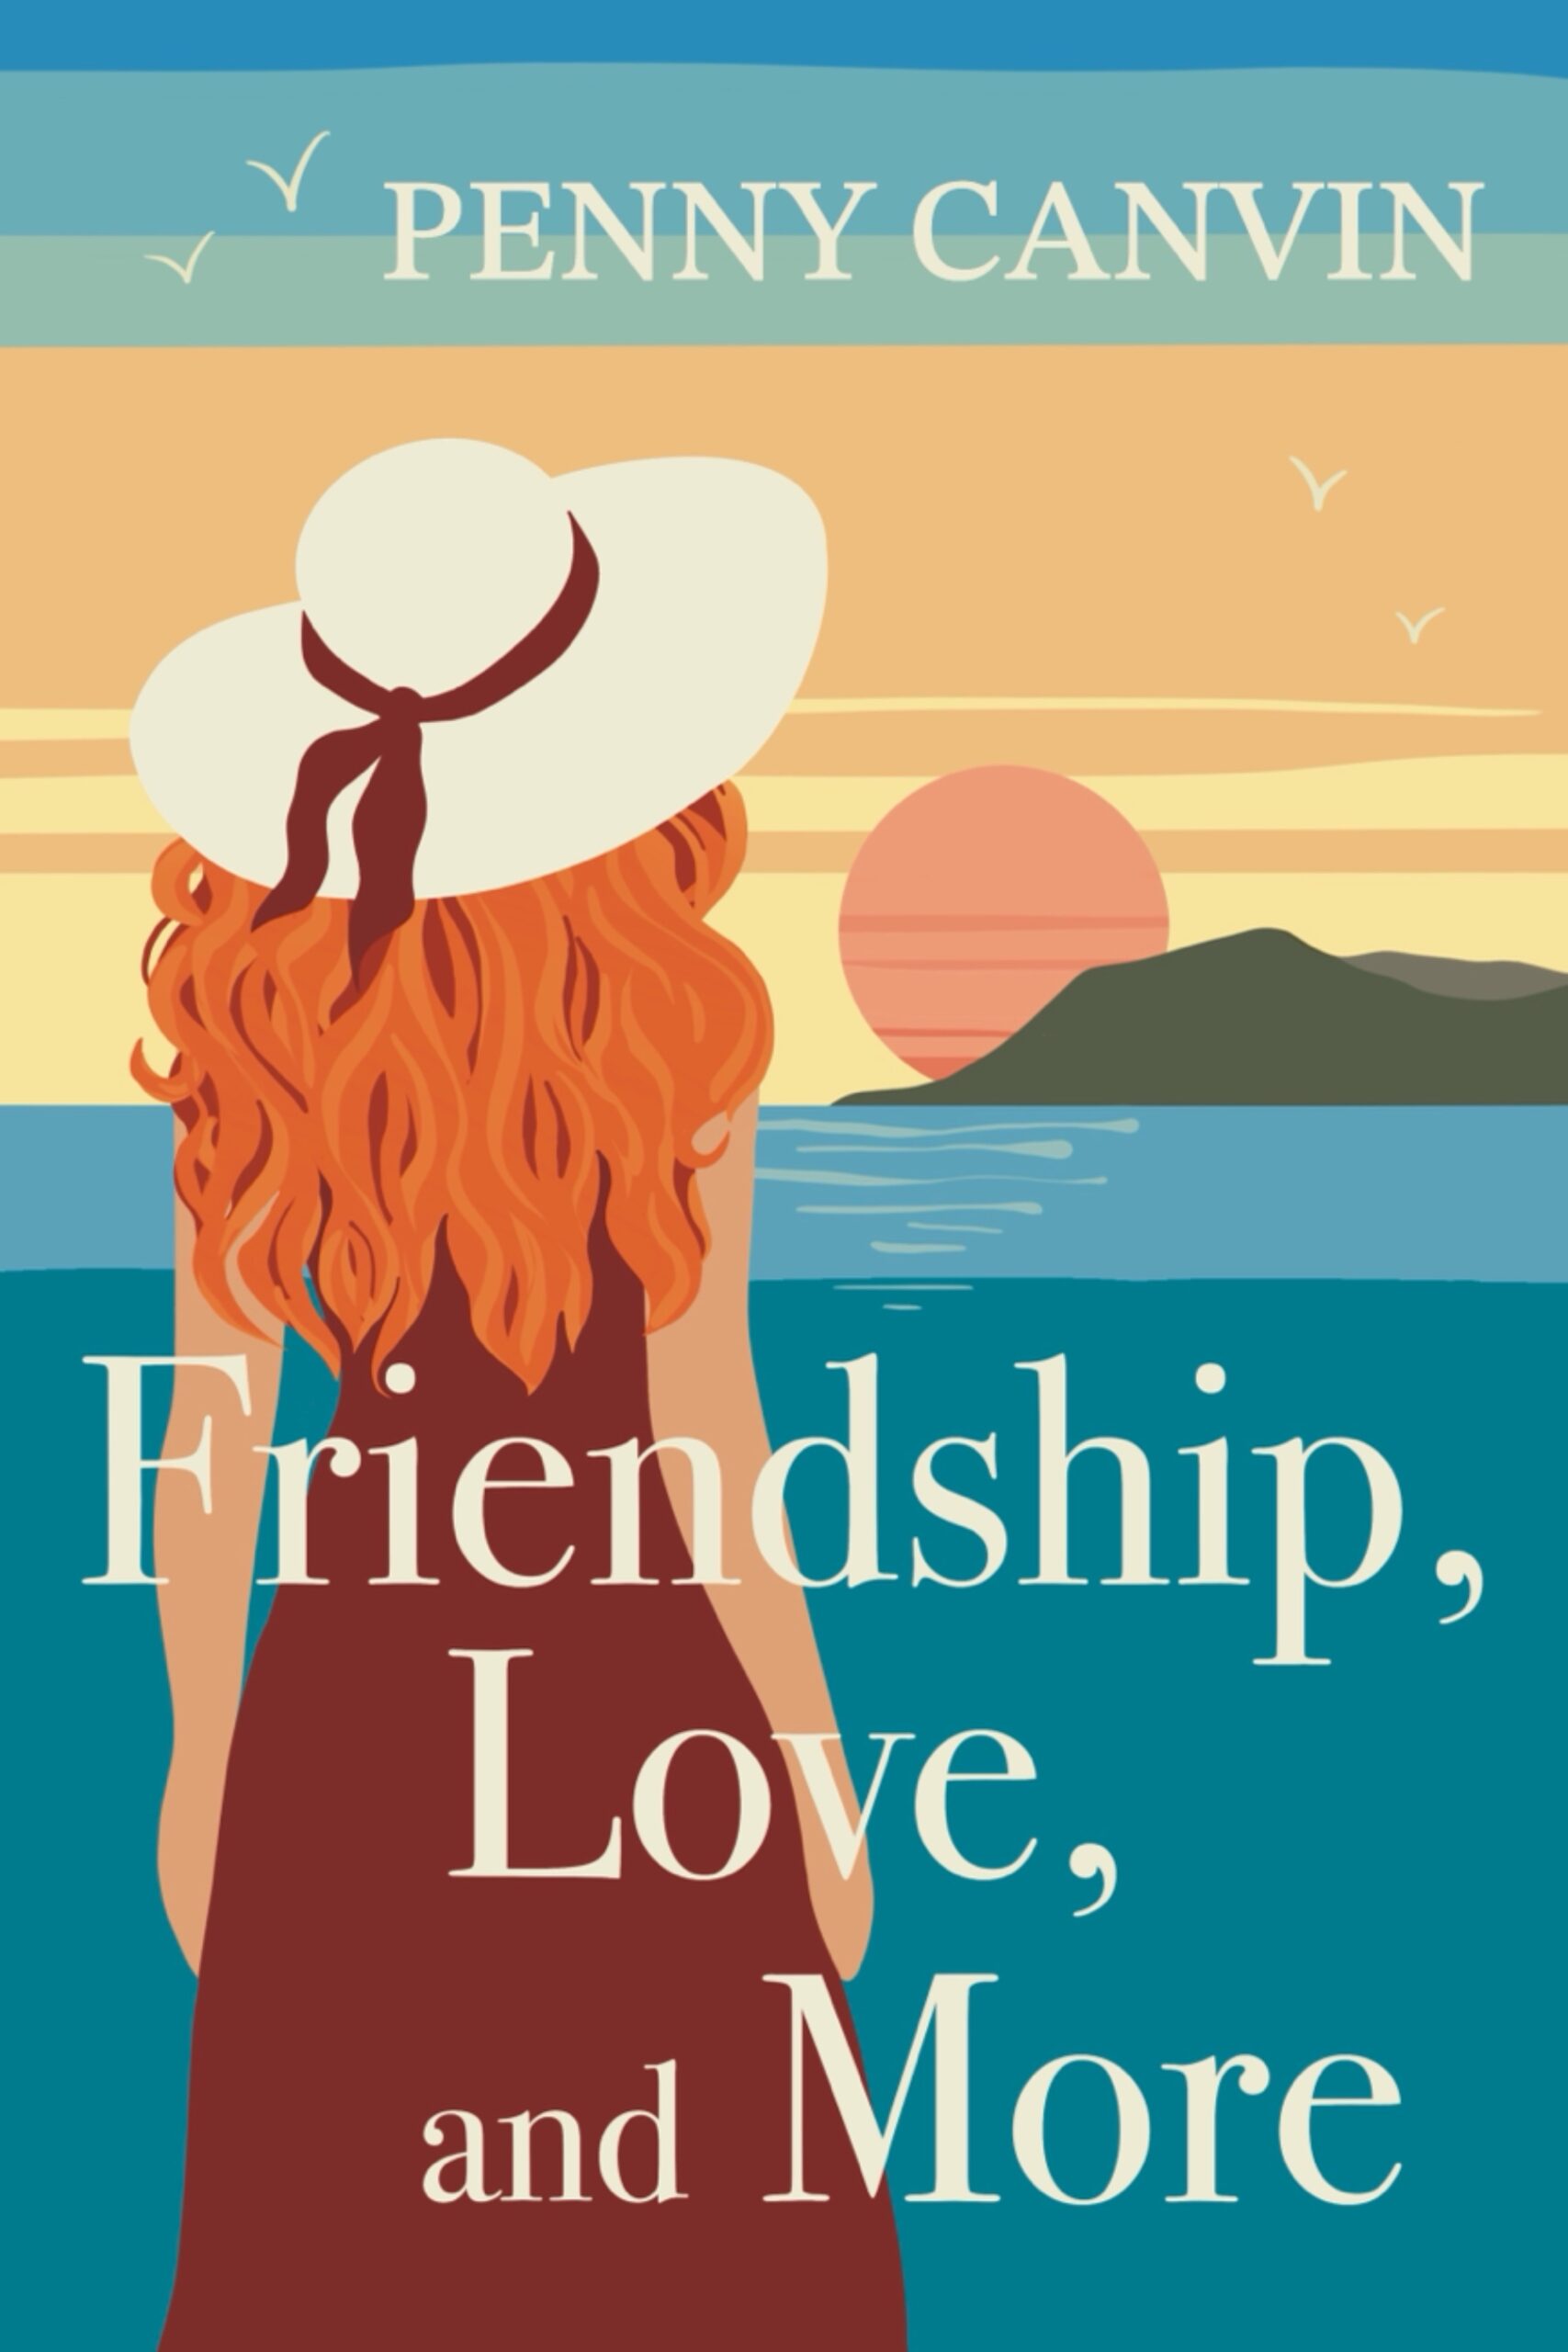 image of friendship love and more by Penny Canvin